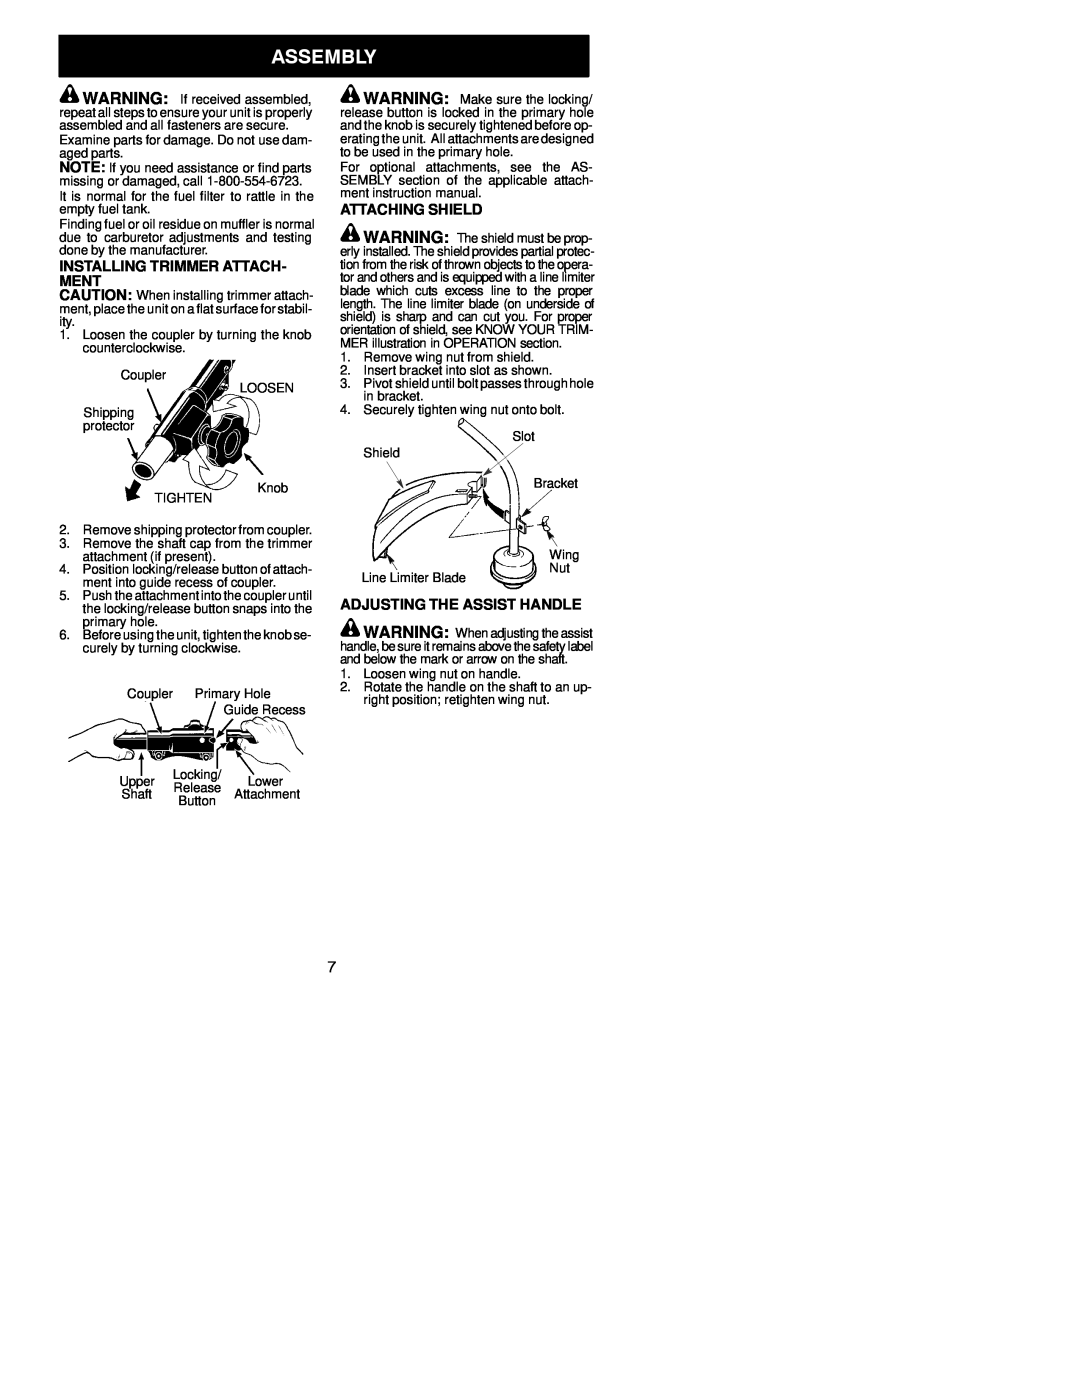 Poulan 530164253 instruction manual Installing Trimmer Attach- Ment, Attaching Shield, Adjusting The Assist Handle 